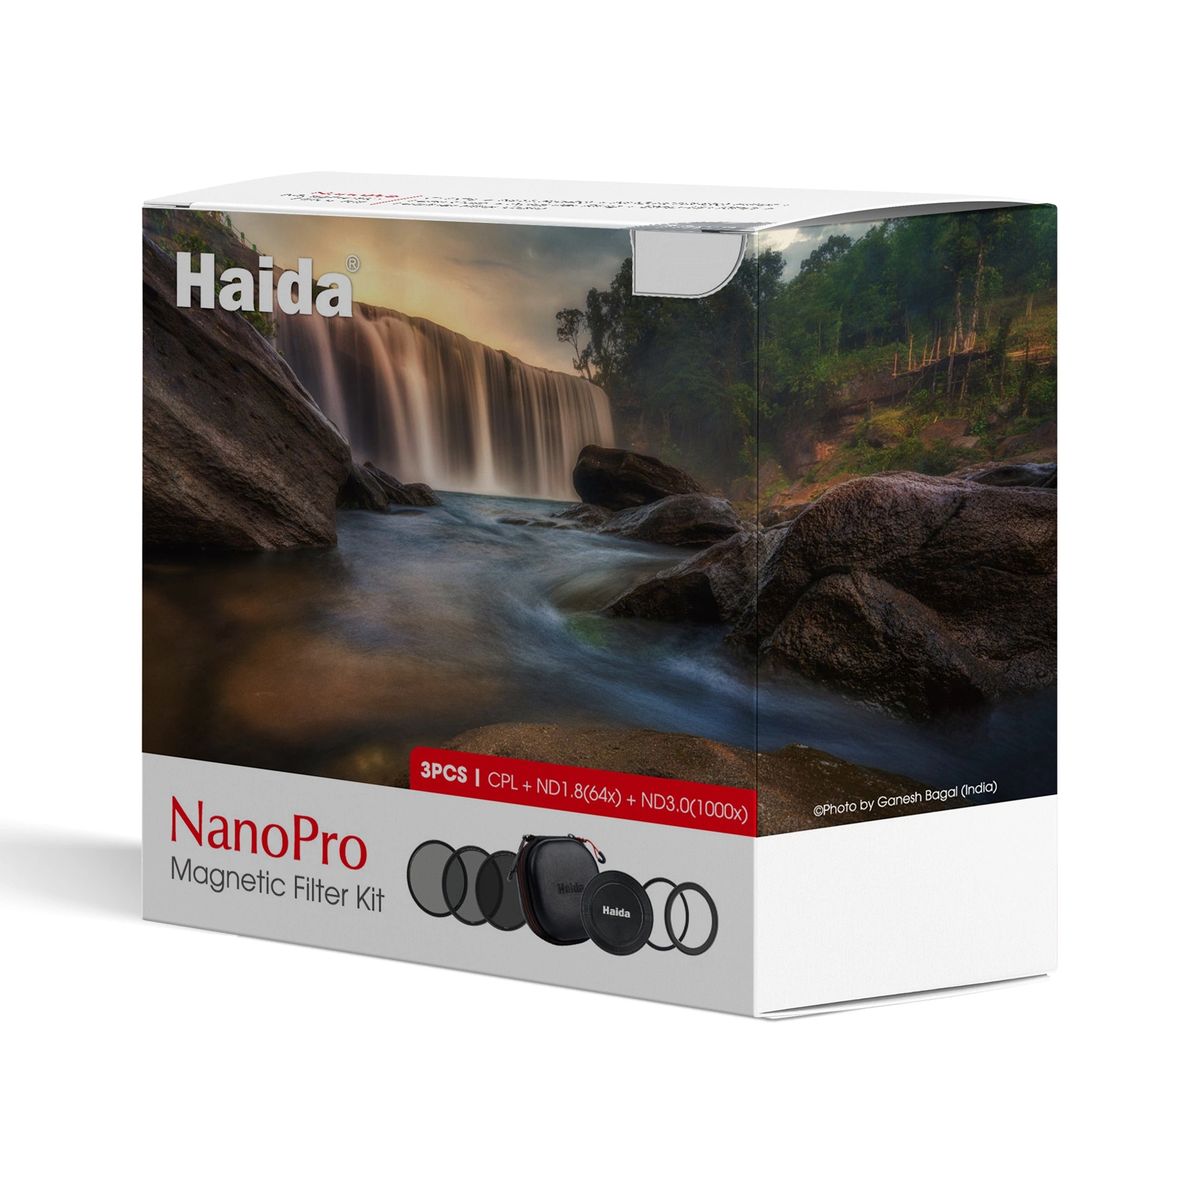 Haida NanoPro Magnetic Filter Kit (CPL+ND1.8+ND3.0) with Step-up Adapter